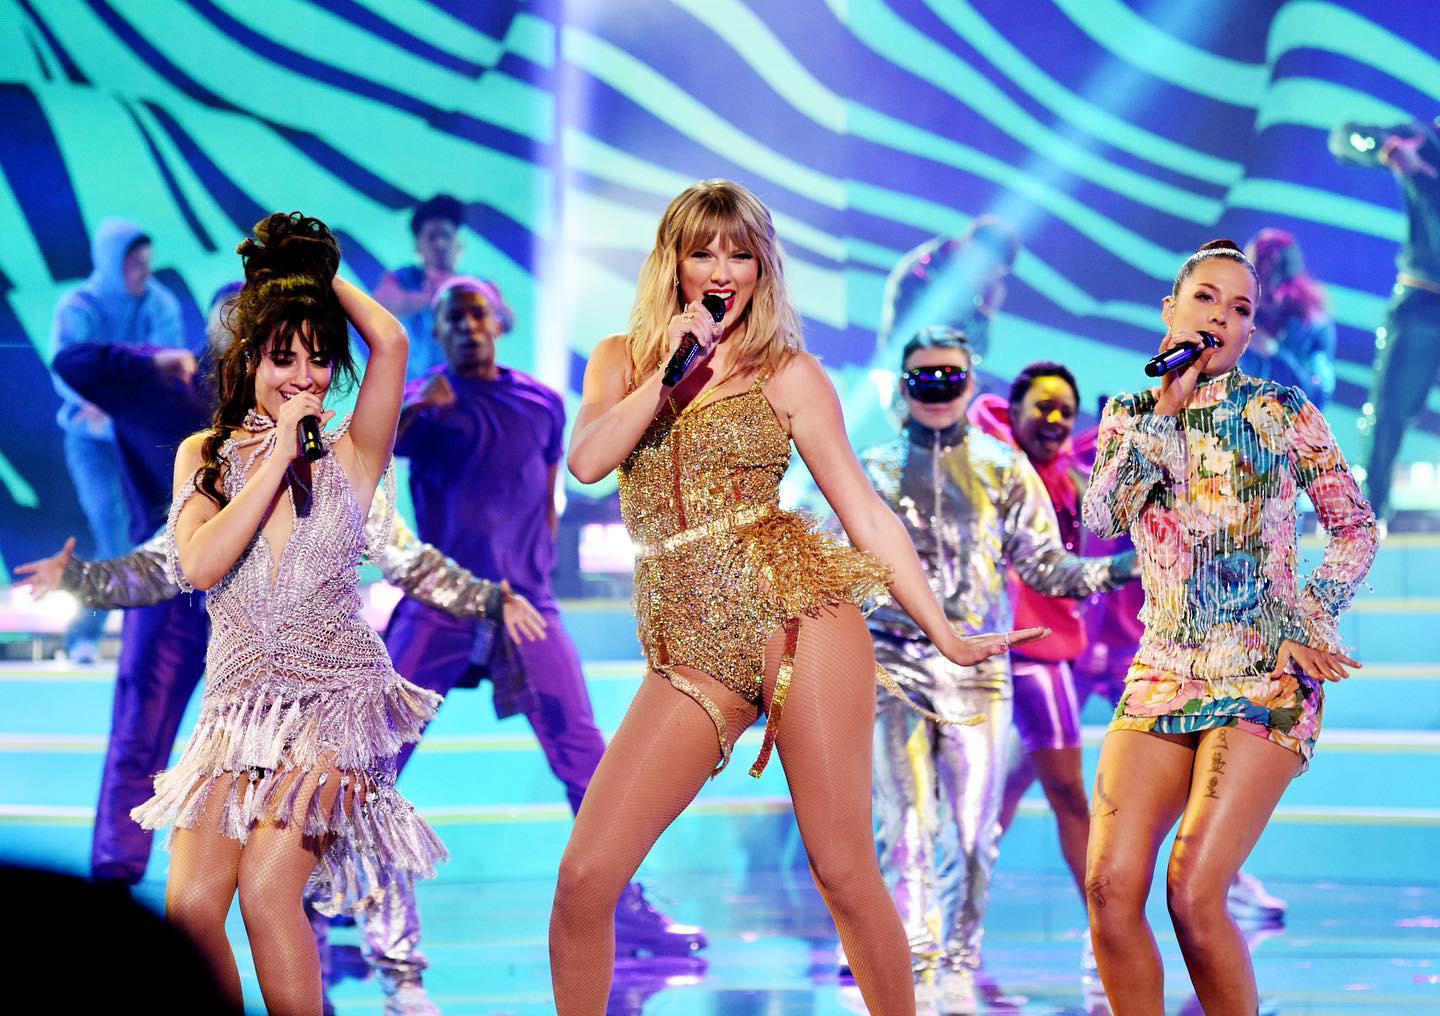 Perfect pairing = these #AMAs collaborations